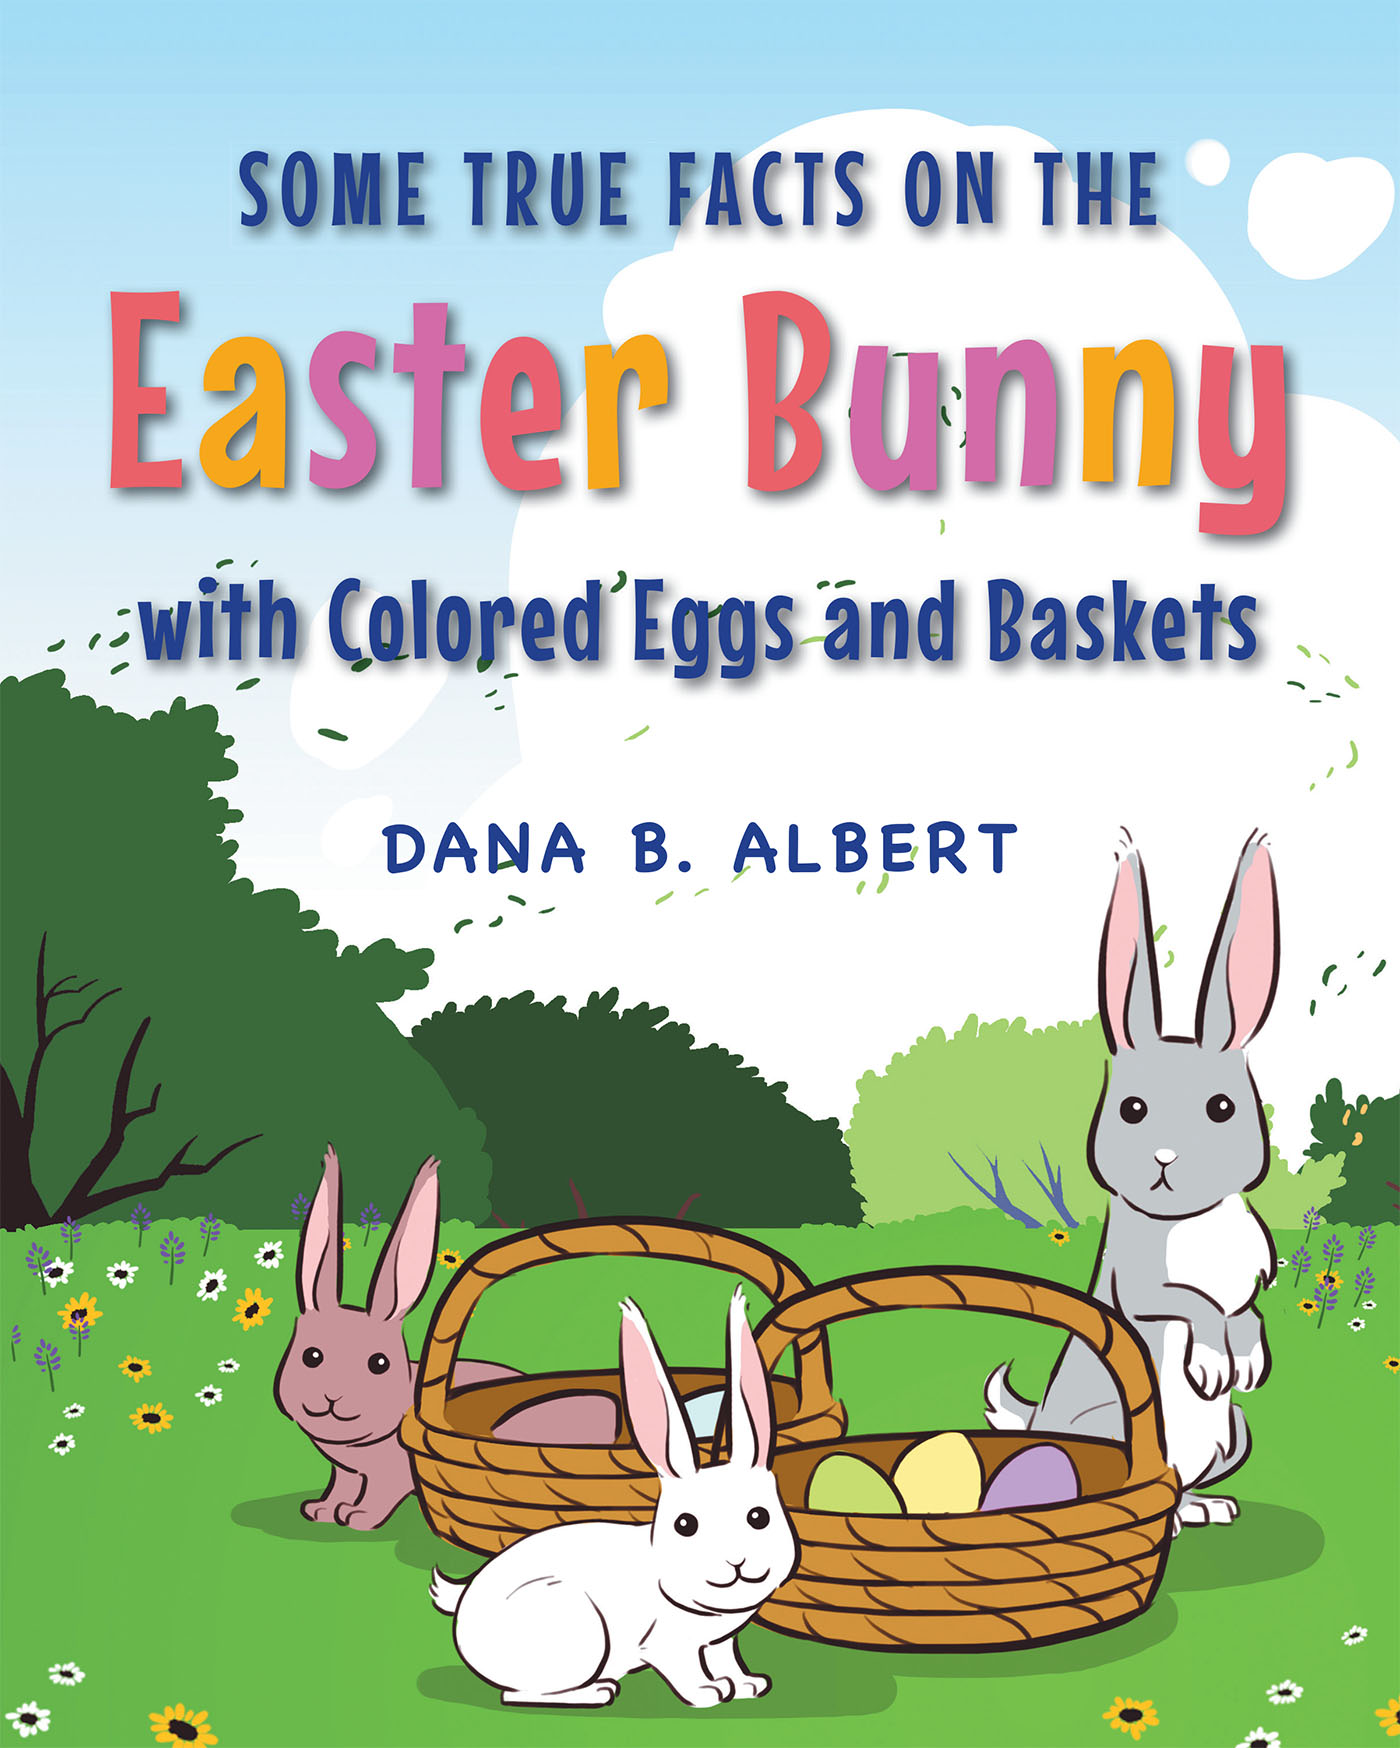 dana-b-albert-s-new-book-some-true-facts-on-the-easter-bunny-with